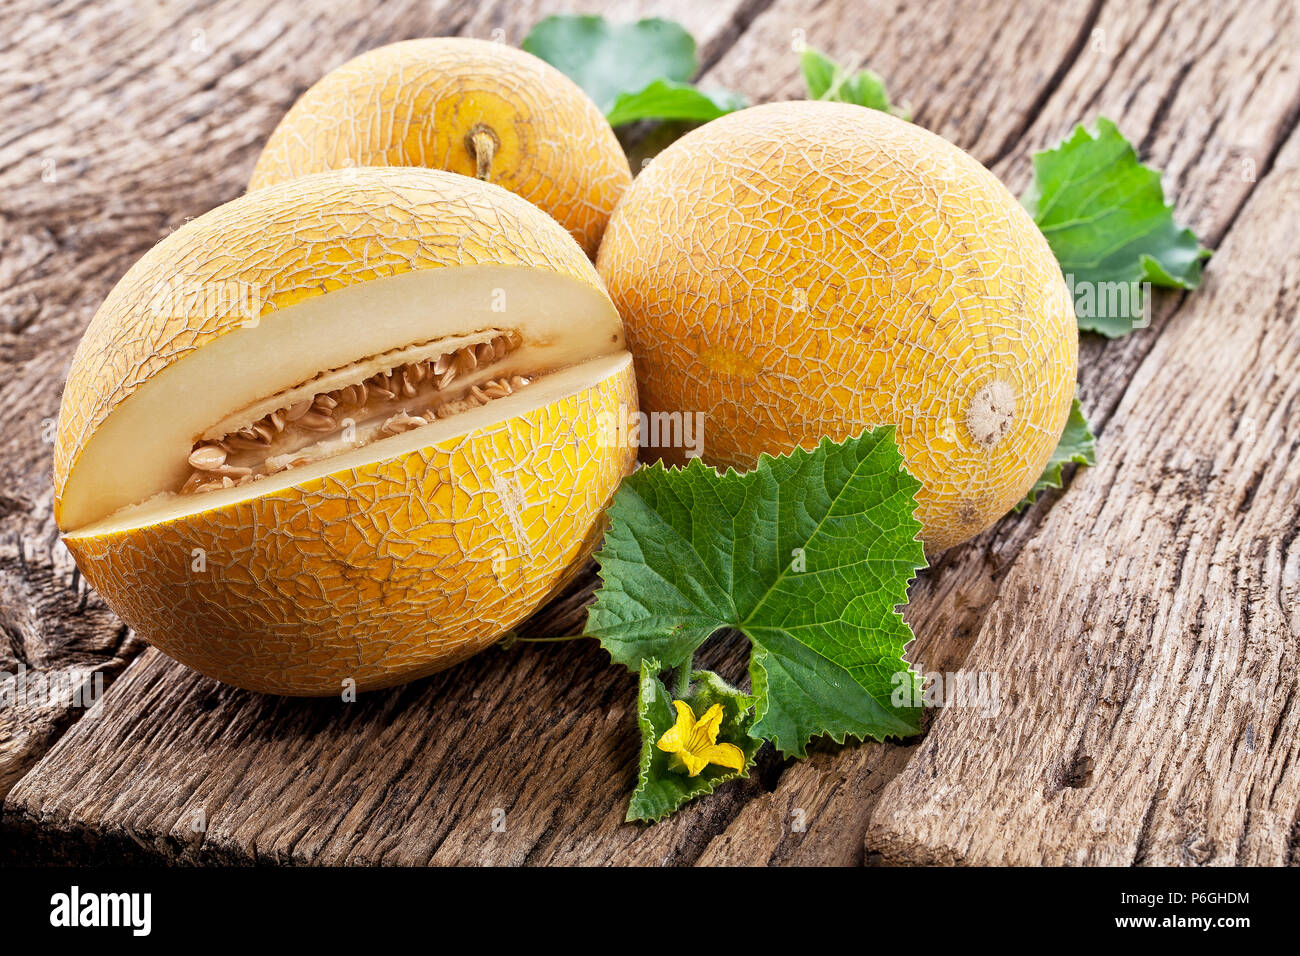 Ripes melons with melon leaves on wooden background. Stock Photo